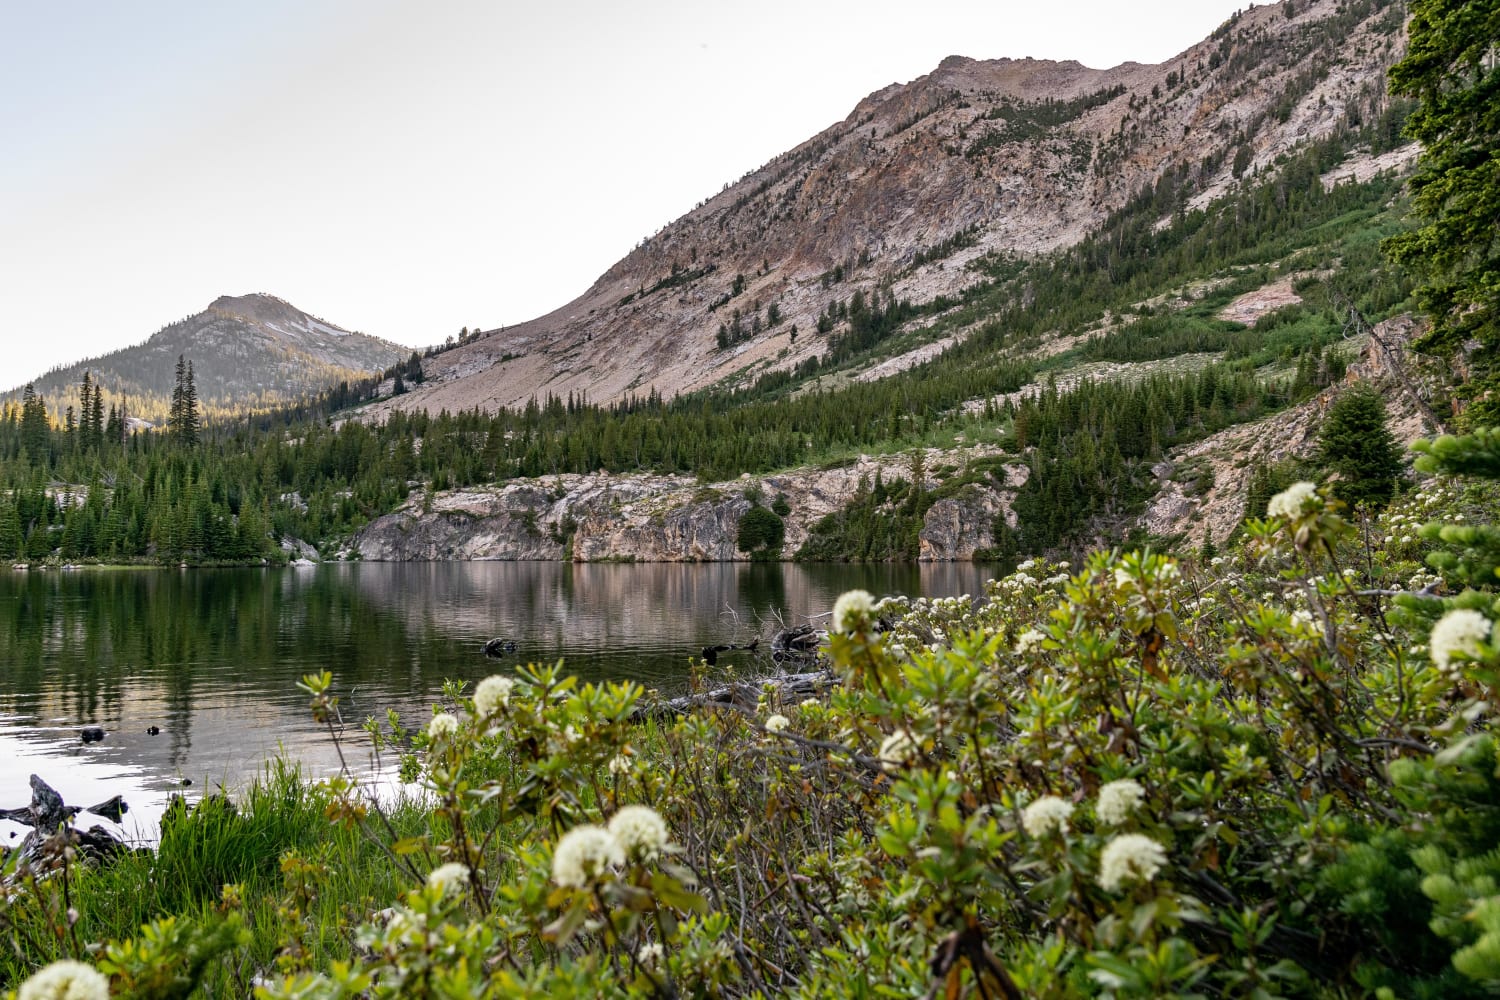 Lovely view from our campsite at Farley Lake in the Sawtooth Wilderness about a month ago. Not pictured: the hoards of mosquitoes that came out for the sunset.